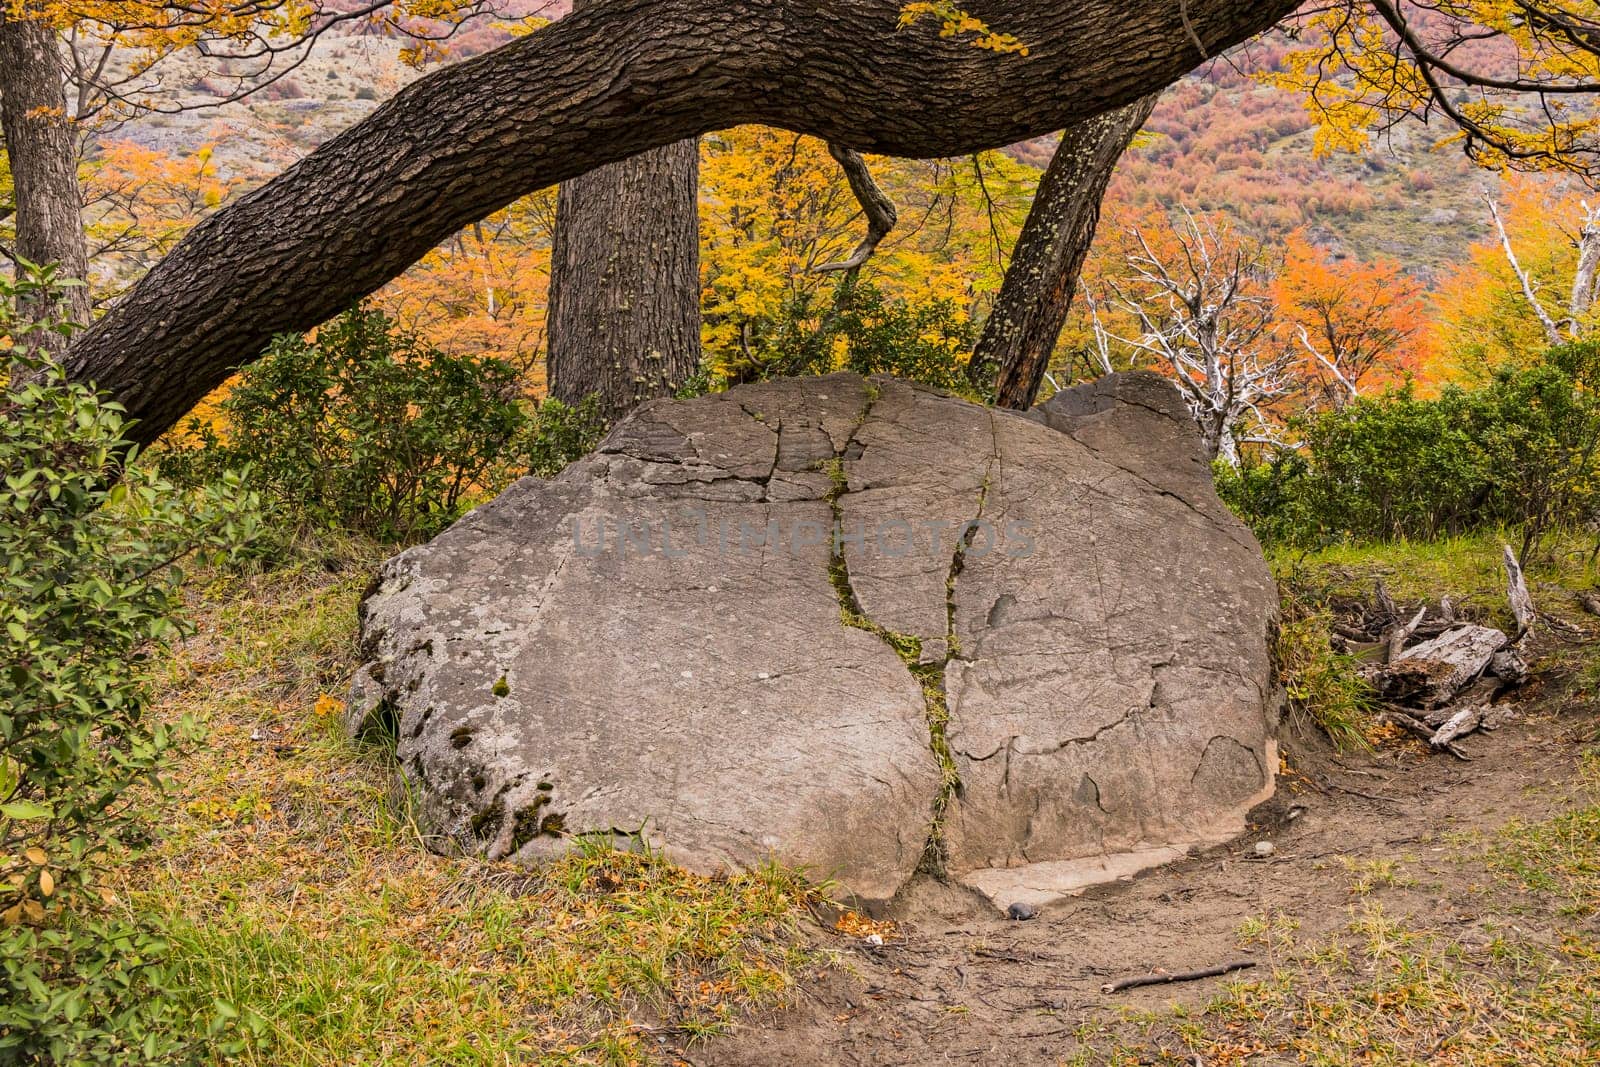 A prominent rock under an autumn colored tree on a path in Torres del Paine National Park near Grey Glacier, Chile, Patagonia, South America